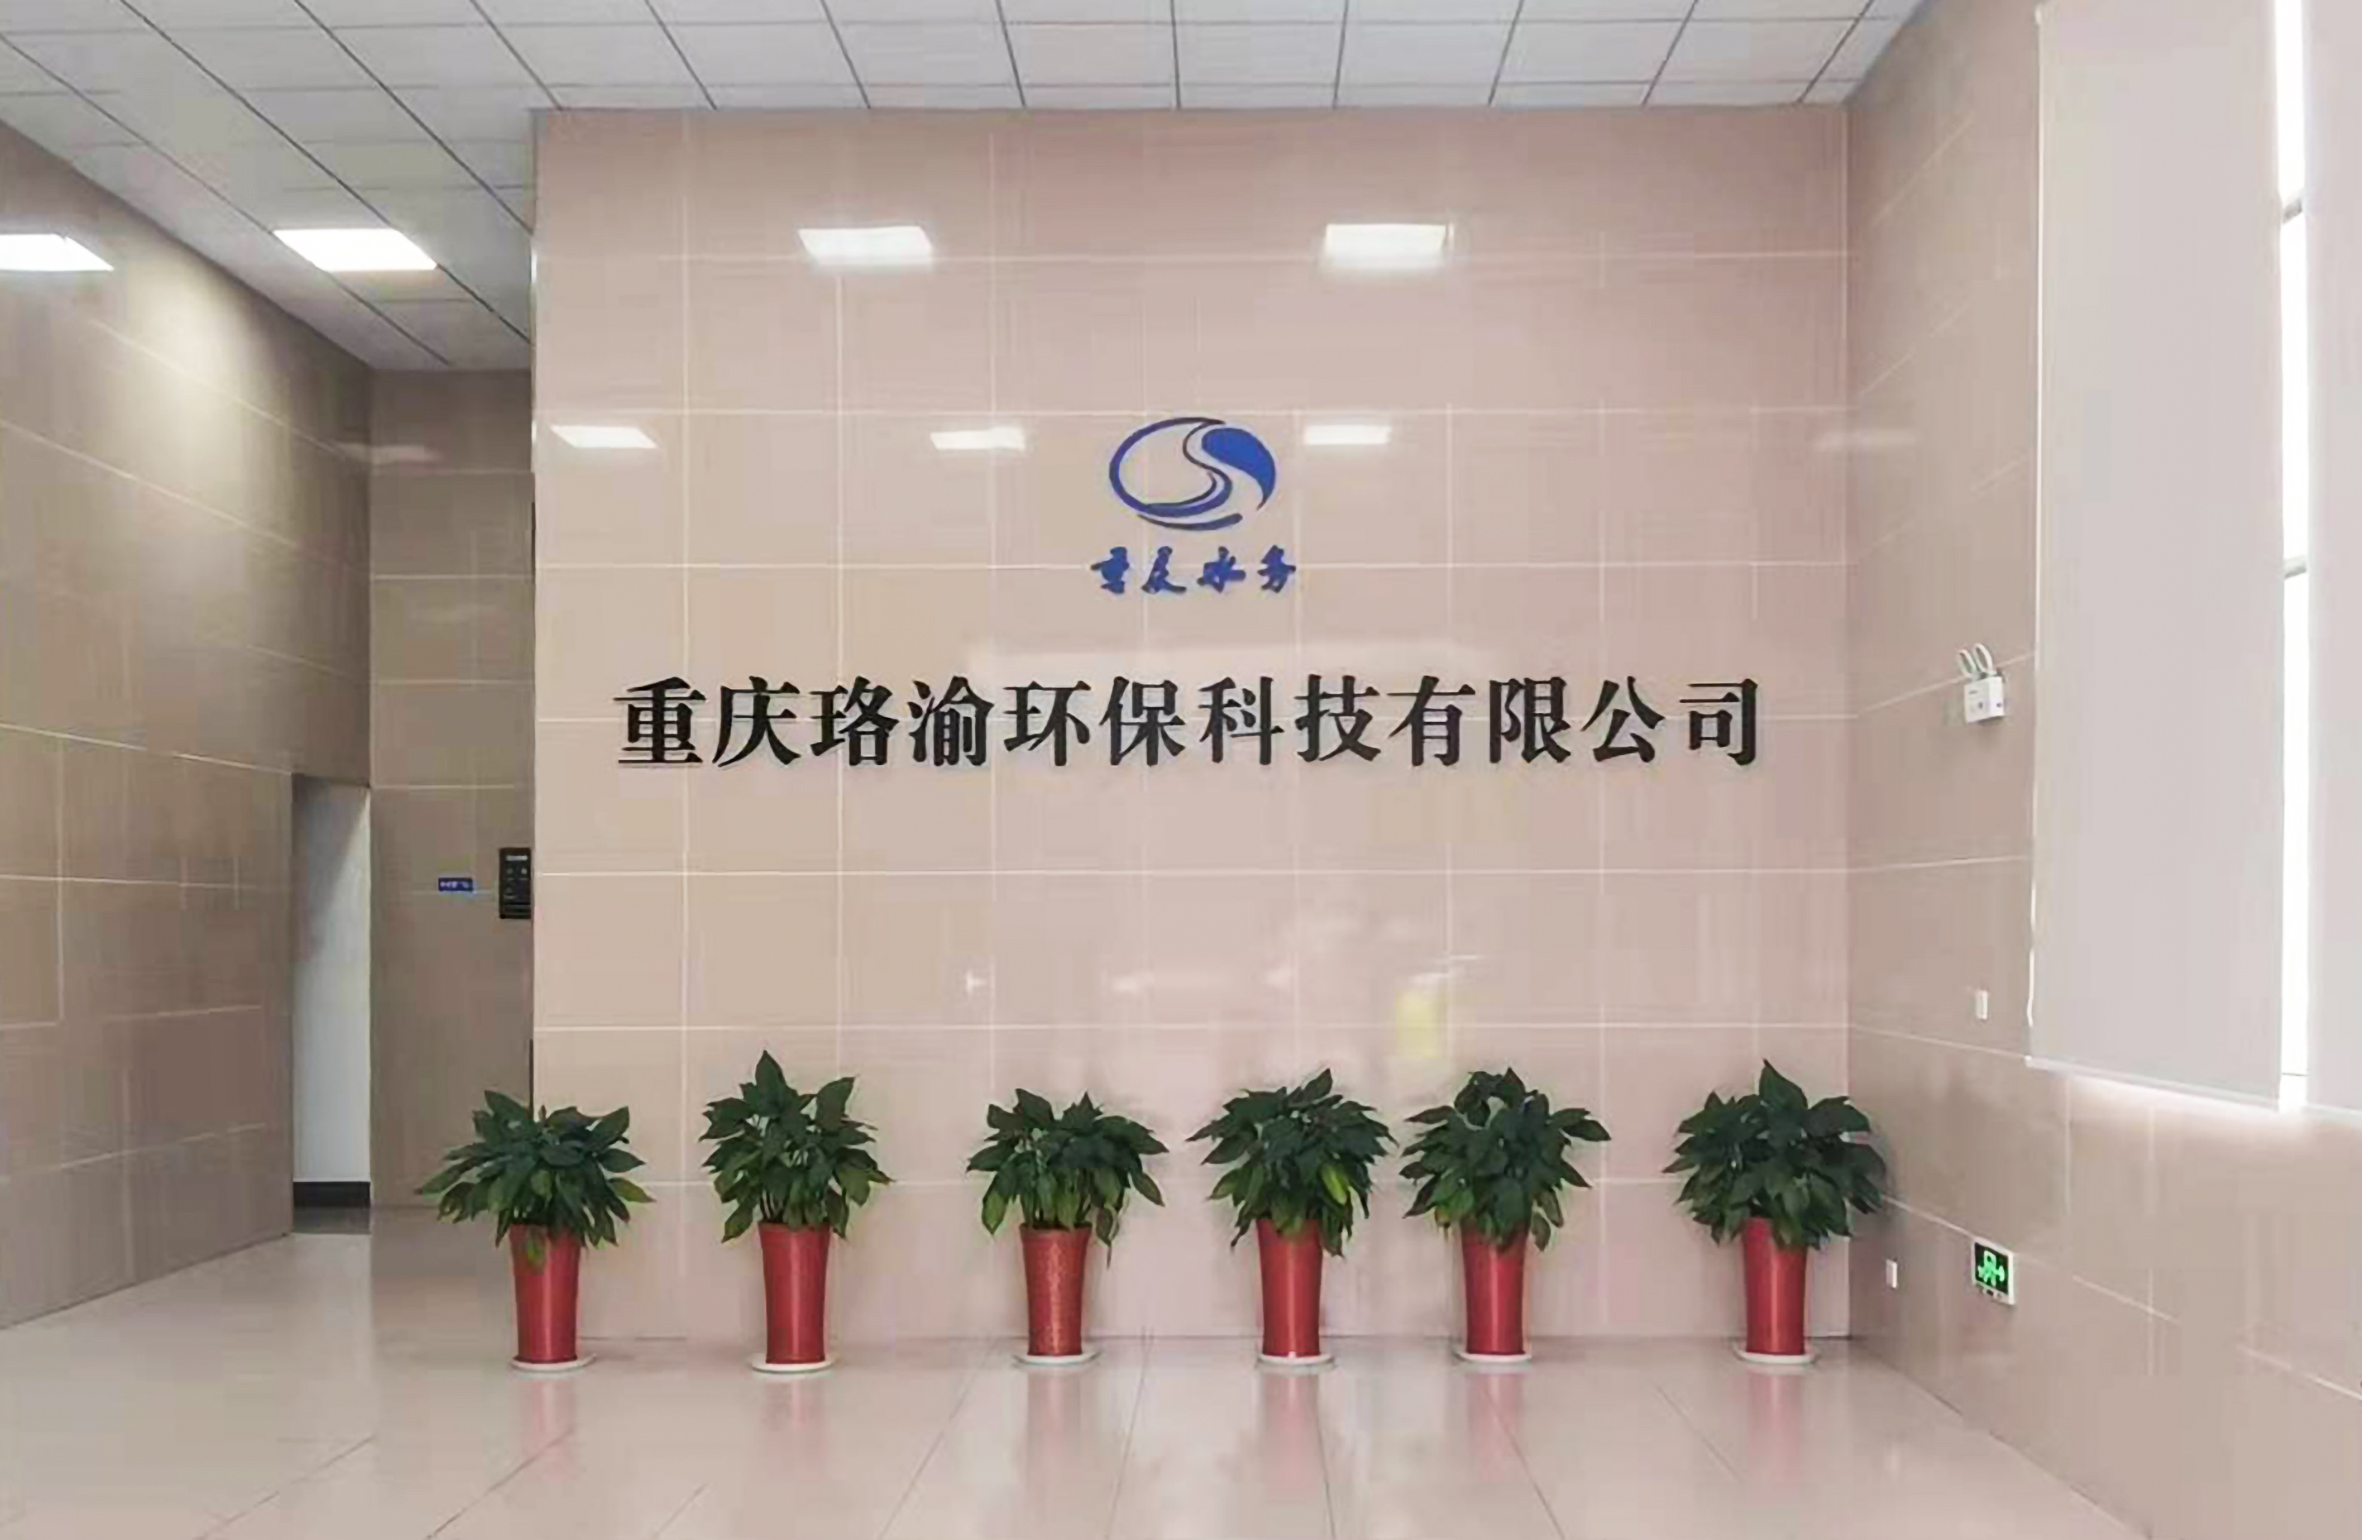 1200t/d Luohuang Sludge Drying Project